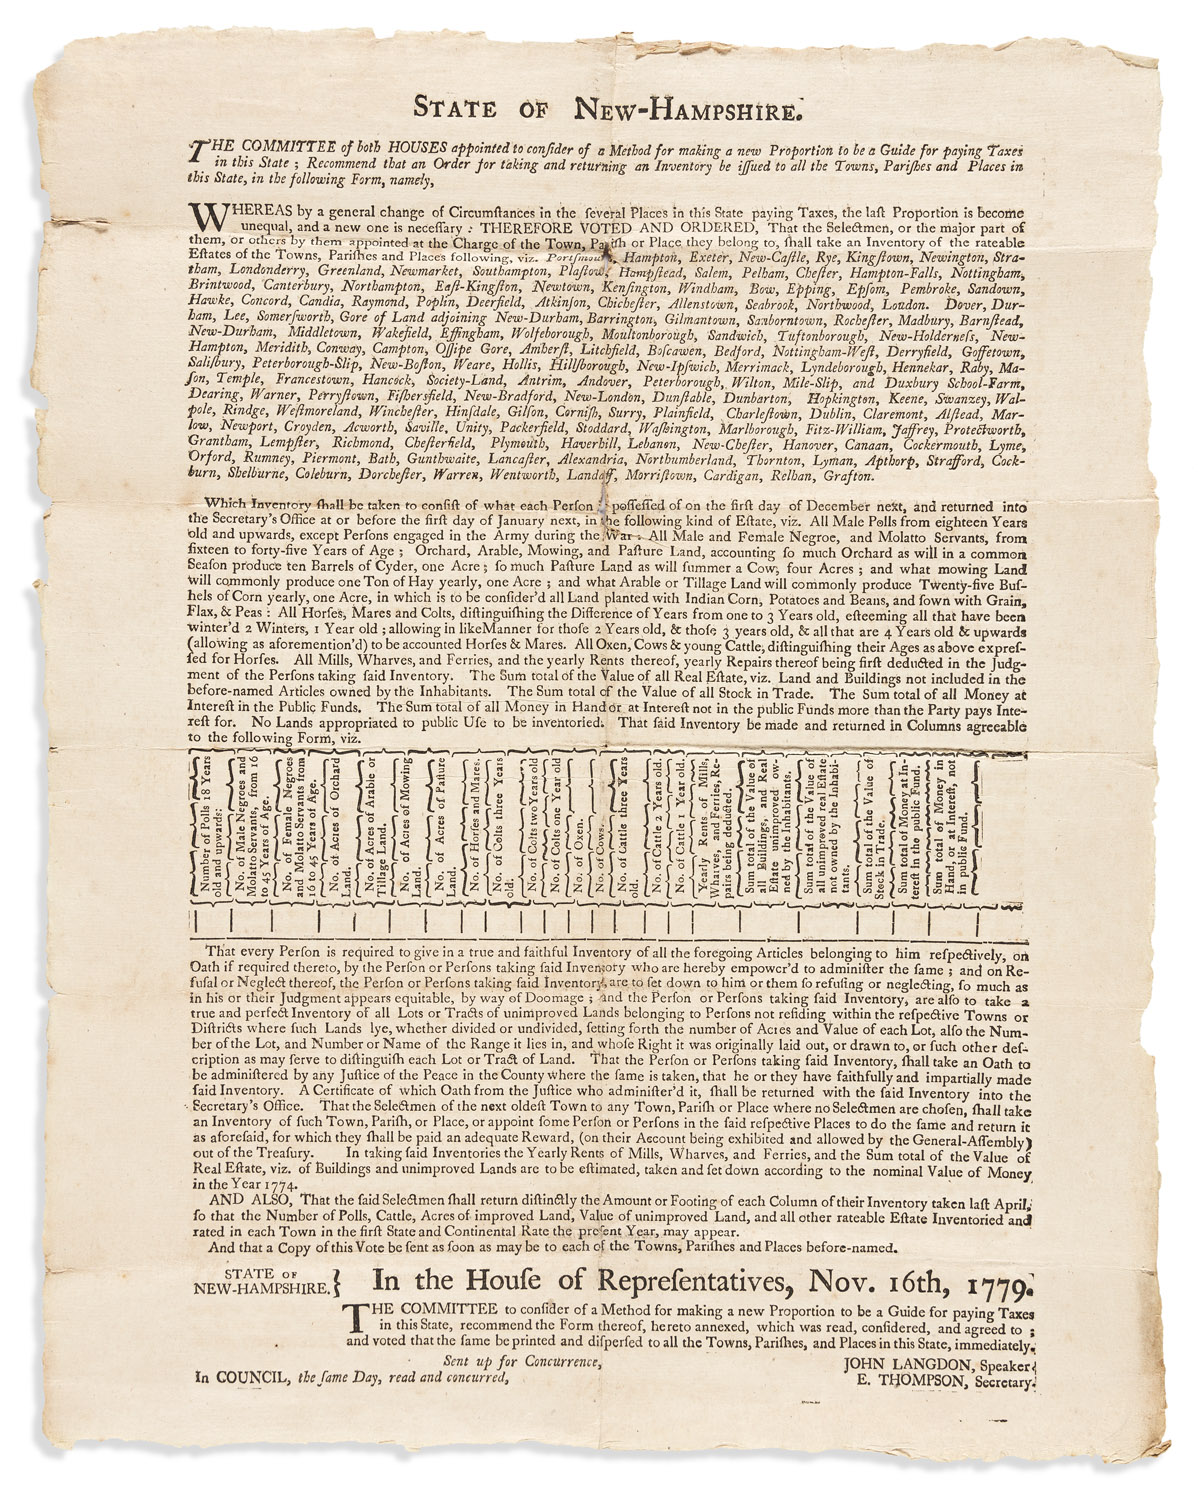 (AMERICAN REVOLUTION--1779.) State of New Hampshire. Broadside on a new Proportion to be a Guide for paying Taxes in this State.